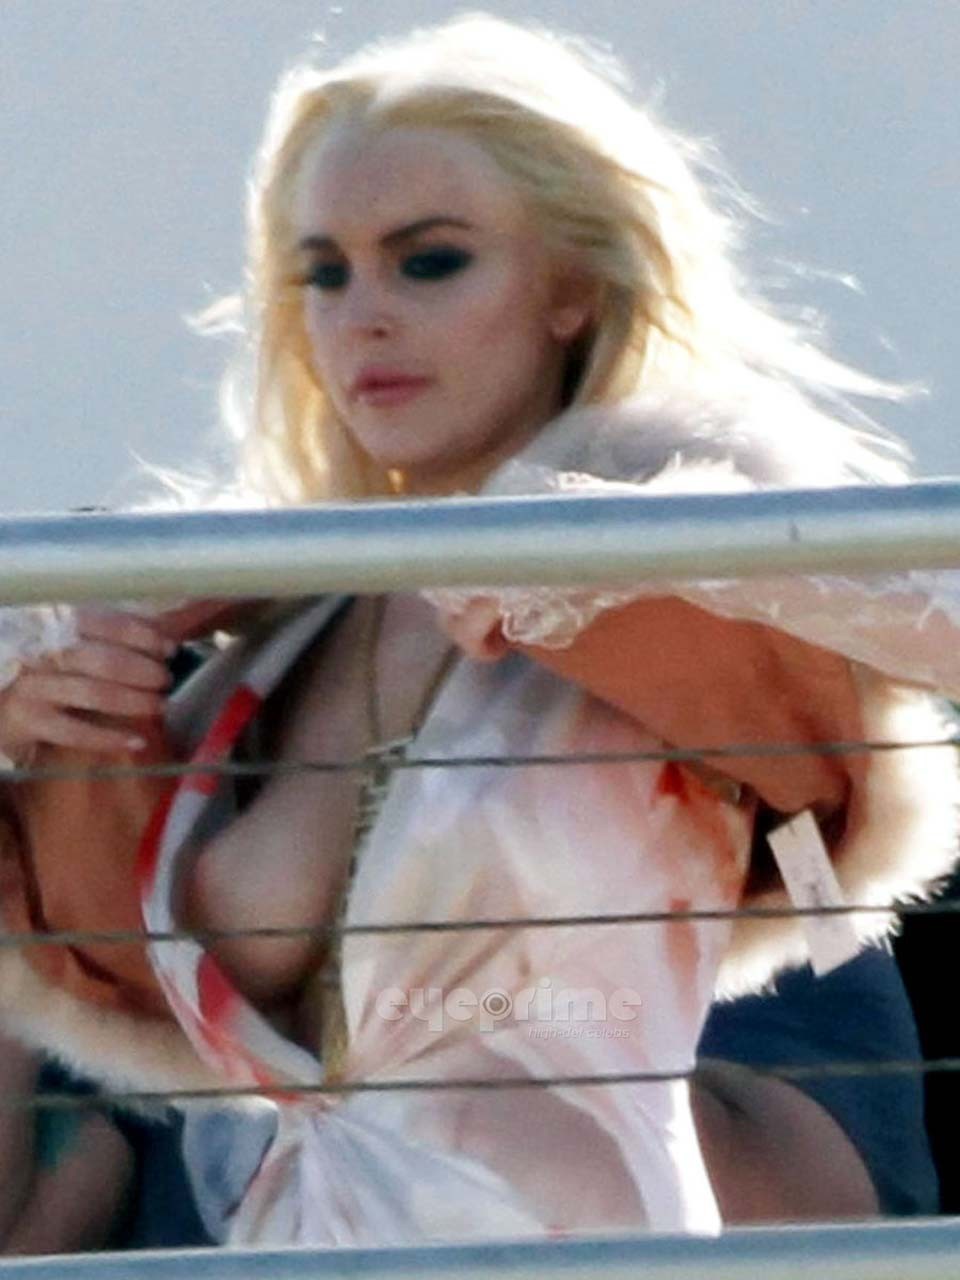 Lindsay Lohan flashing her boobs while doing some photoshoot paparazzi pictures #75302942